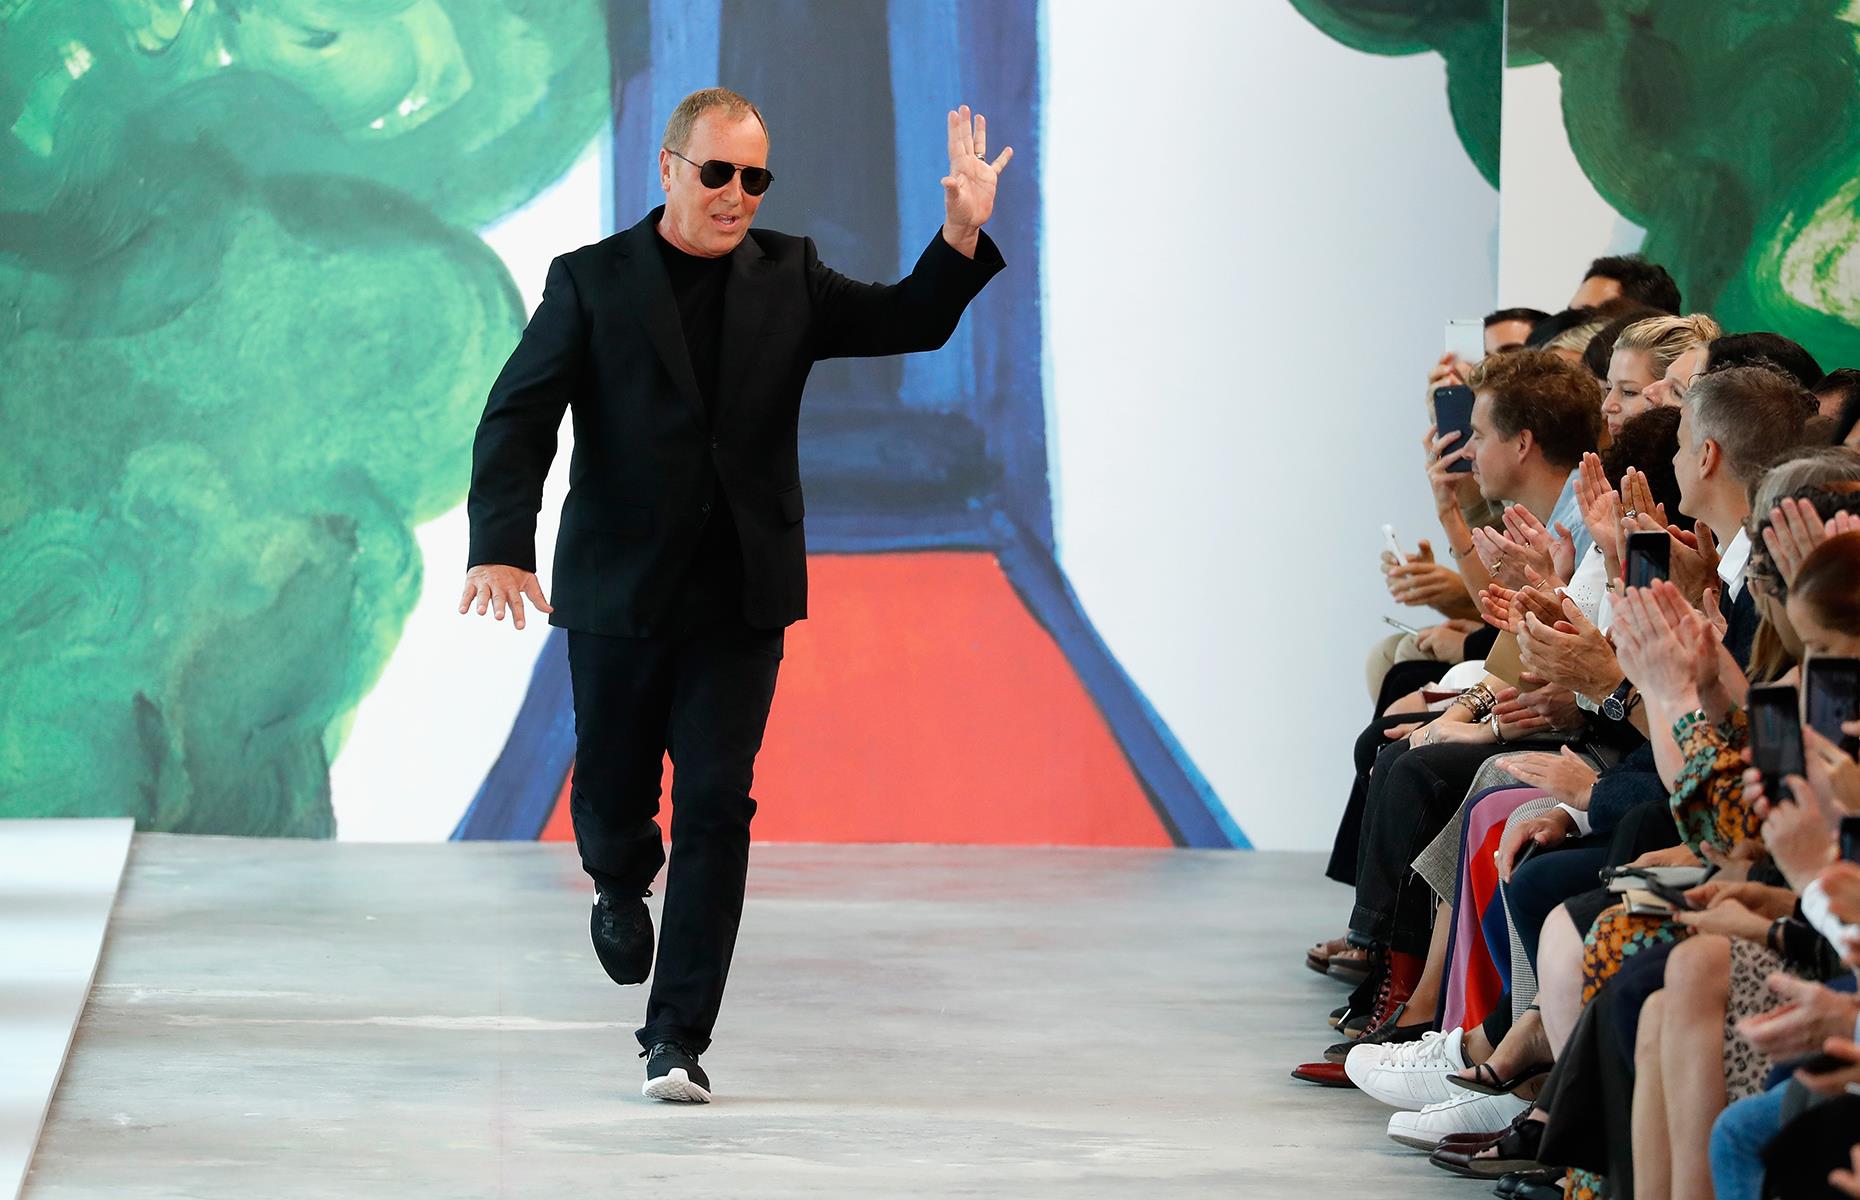 Michael Kors appears to wear the same clothes to work every day